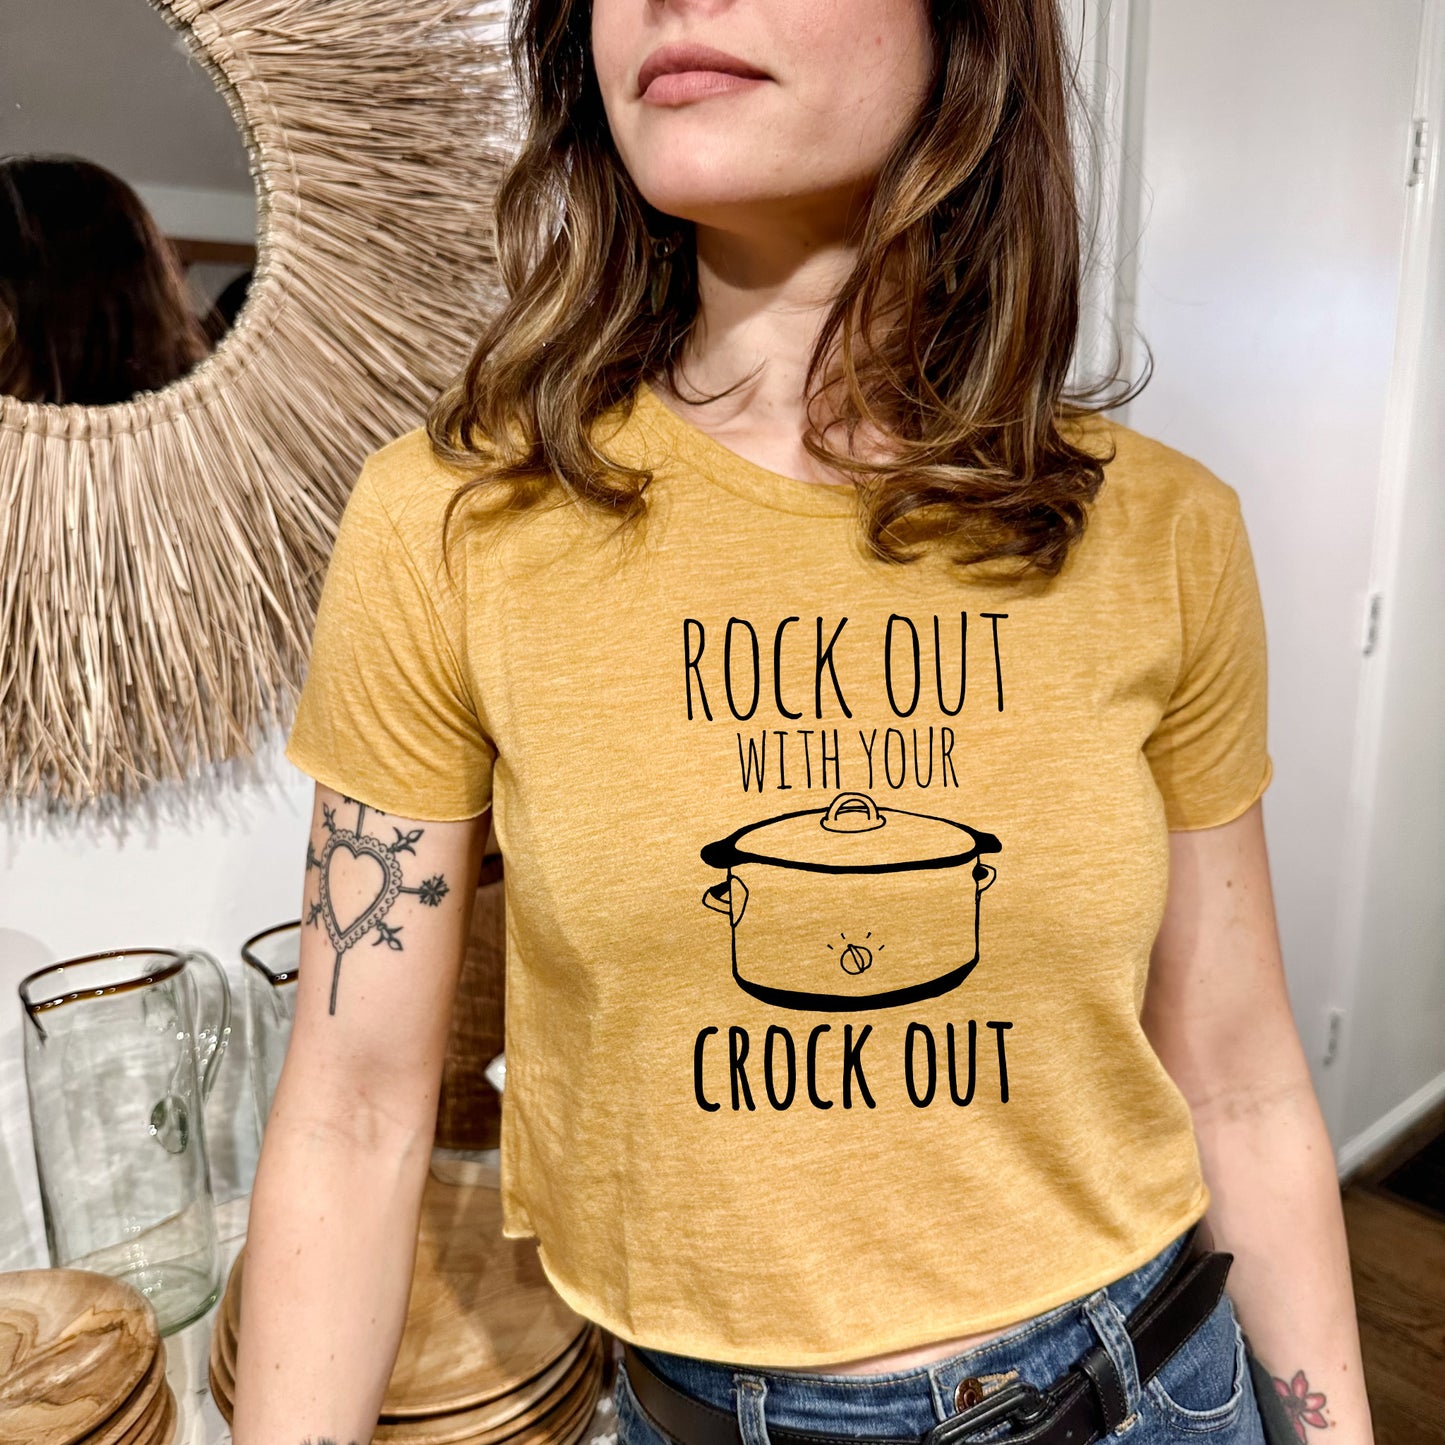 Rock Out With Your Crock Out - Women's Crop Tee - Heather Gray or Gold